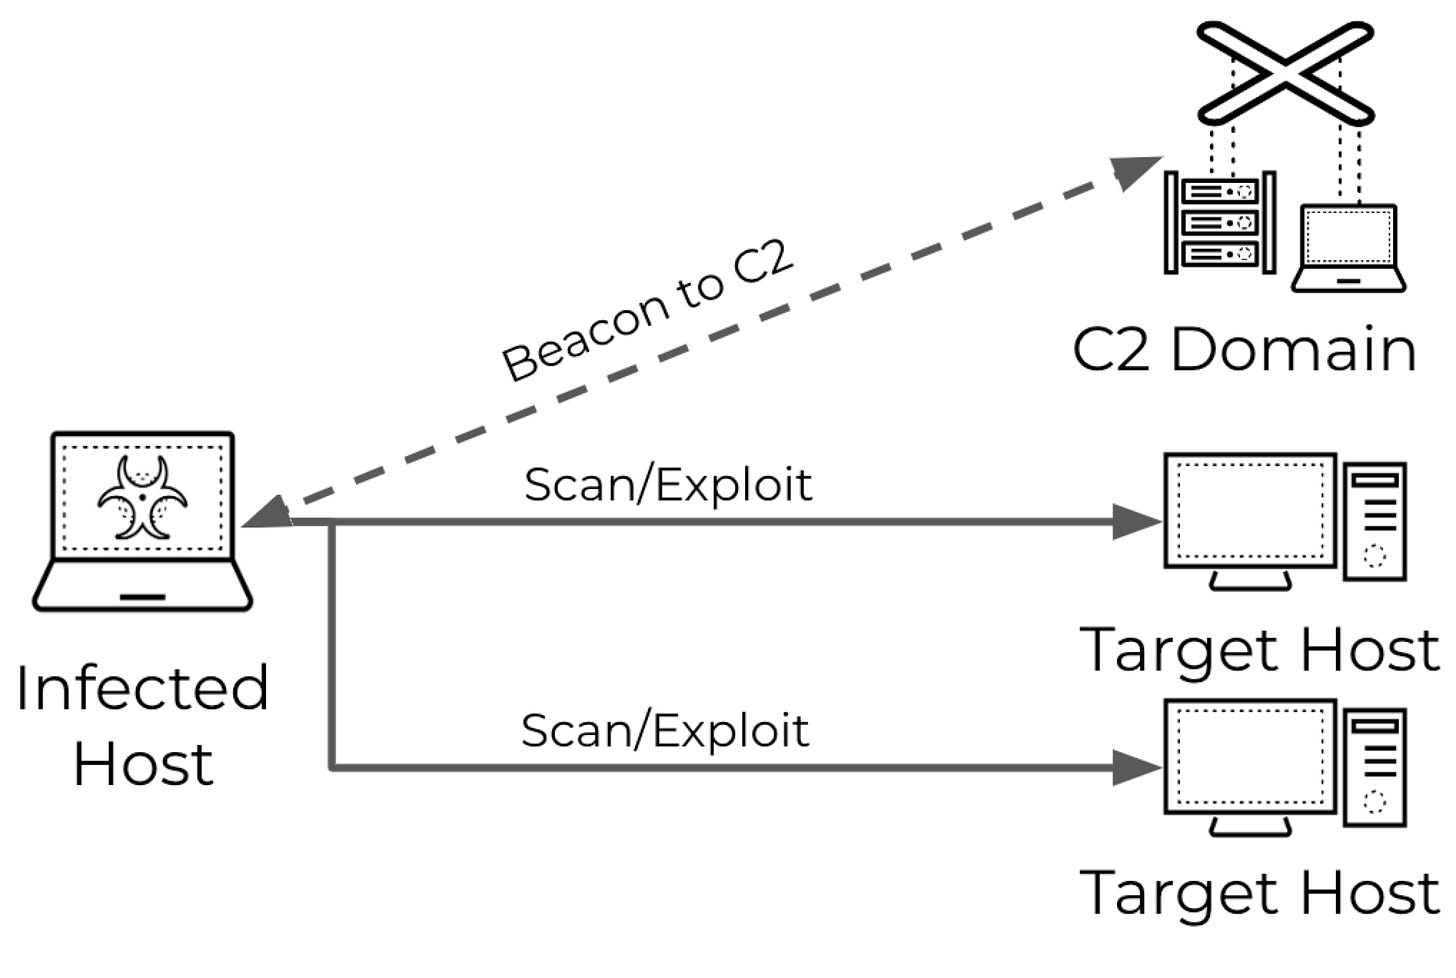 Image 2 is a diagram of malware-driven scanning. The infected host scans and exploits two targeted hosts. A beacon goes to and from the command and control domain and the infected host. 